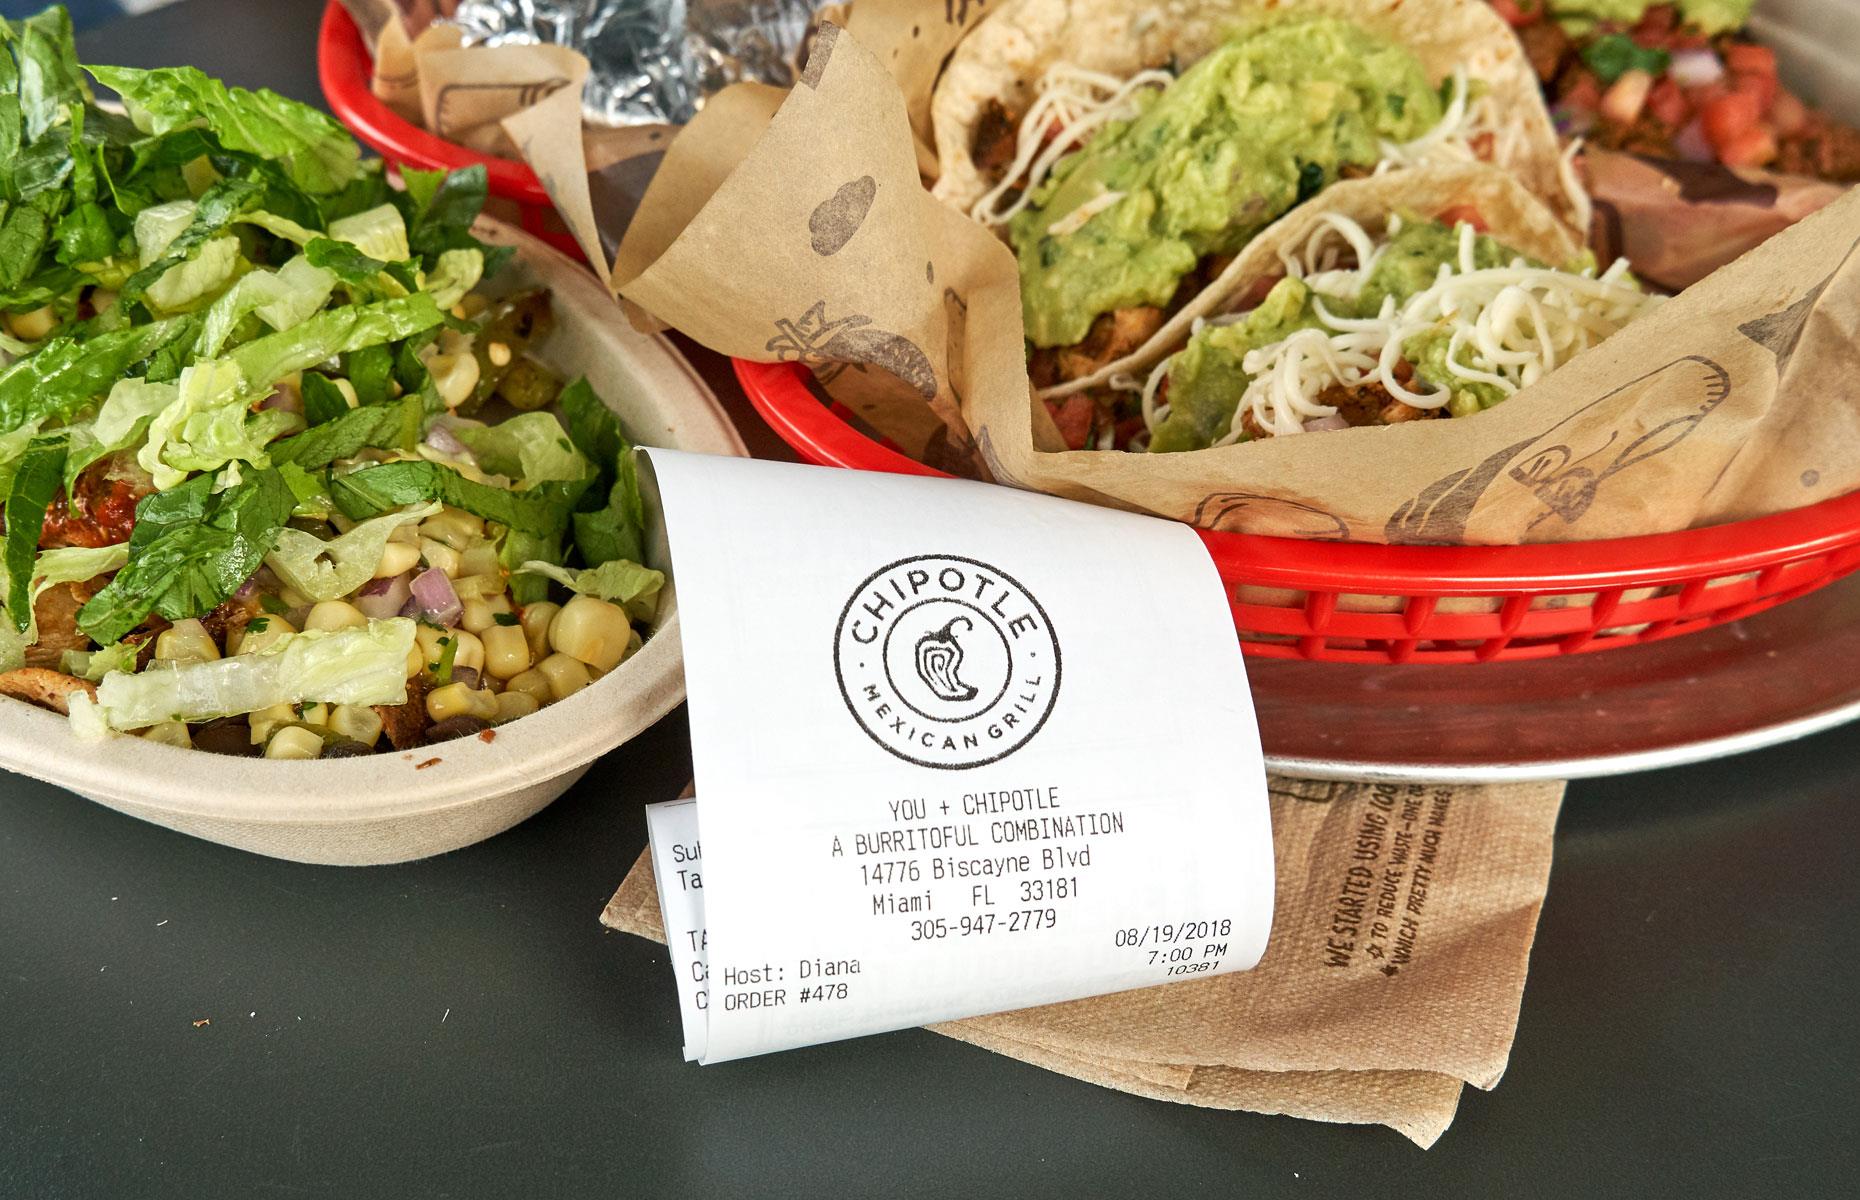 Chipotle Mexican Grill, share price change: +68%